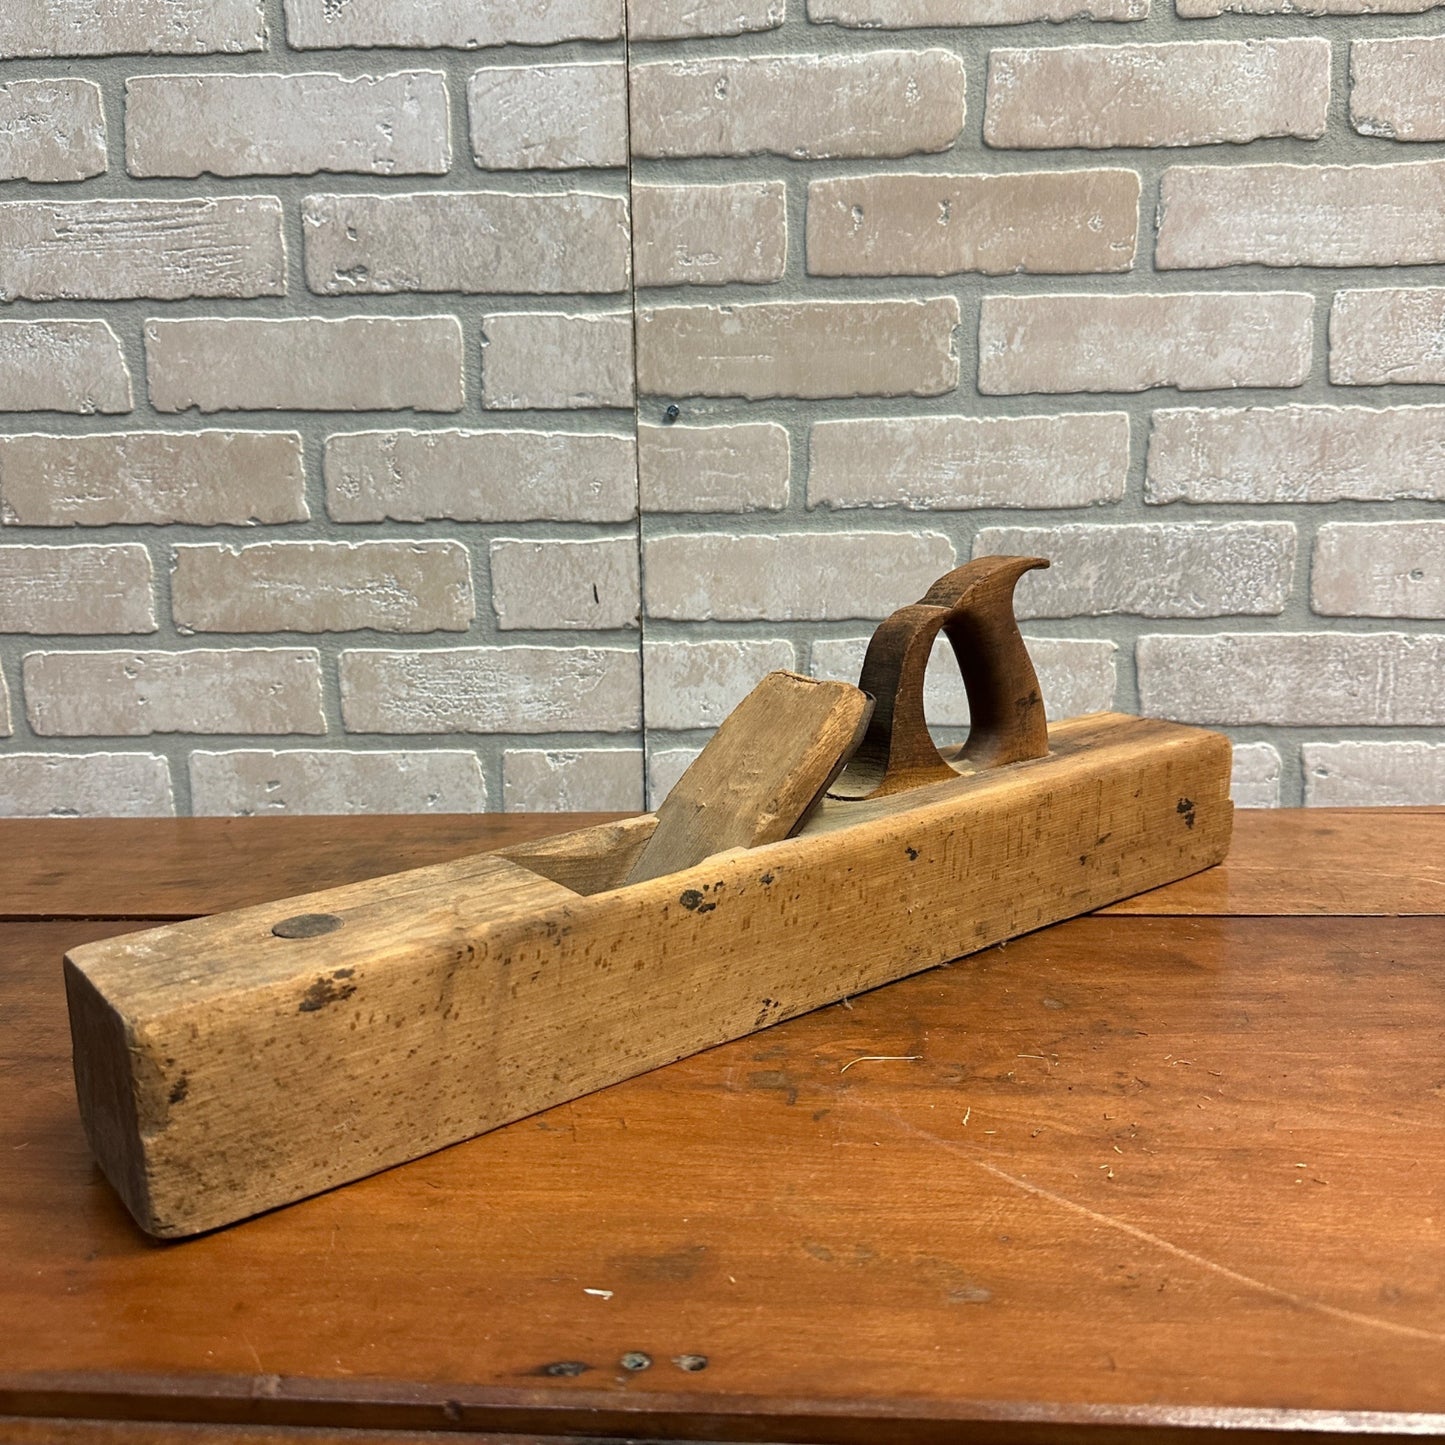 ANTIQUE 22" SCIOTO WORKS / OHIO TOOL CO. JACK FORE PLANE WOODWORKING TOOL